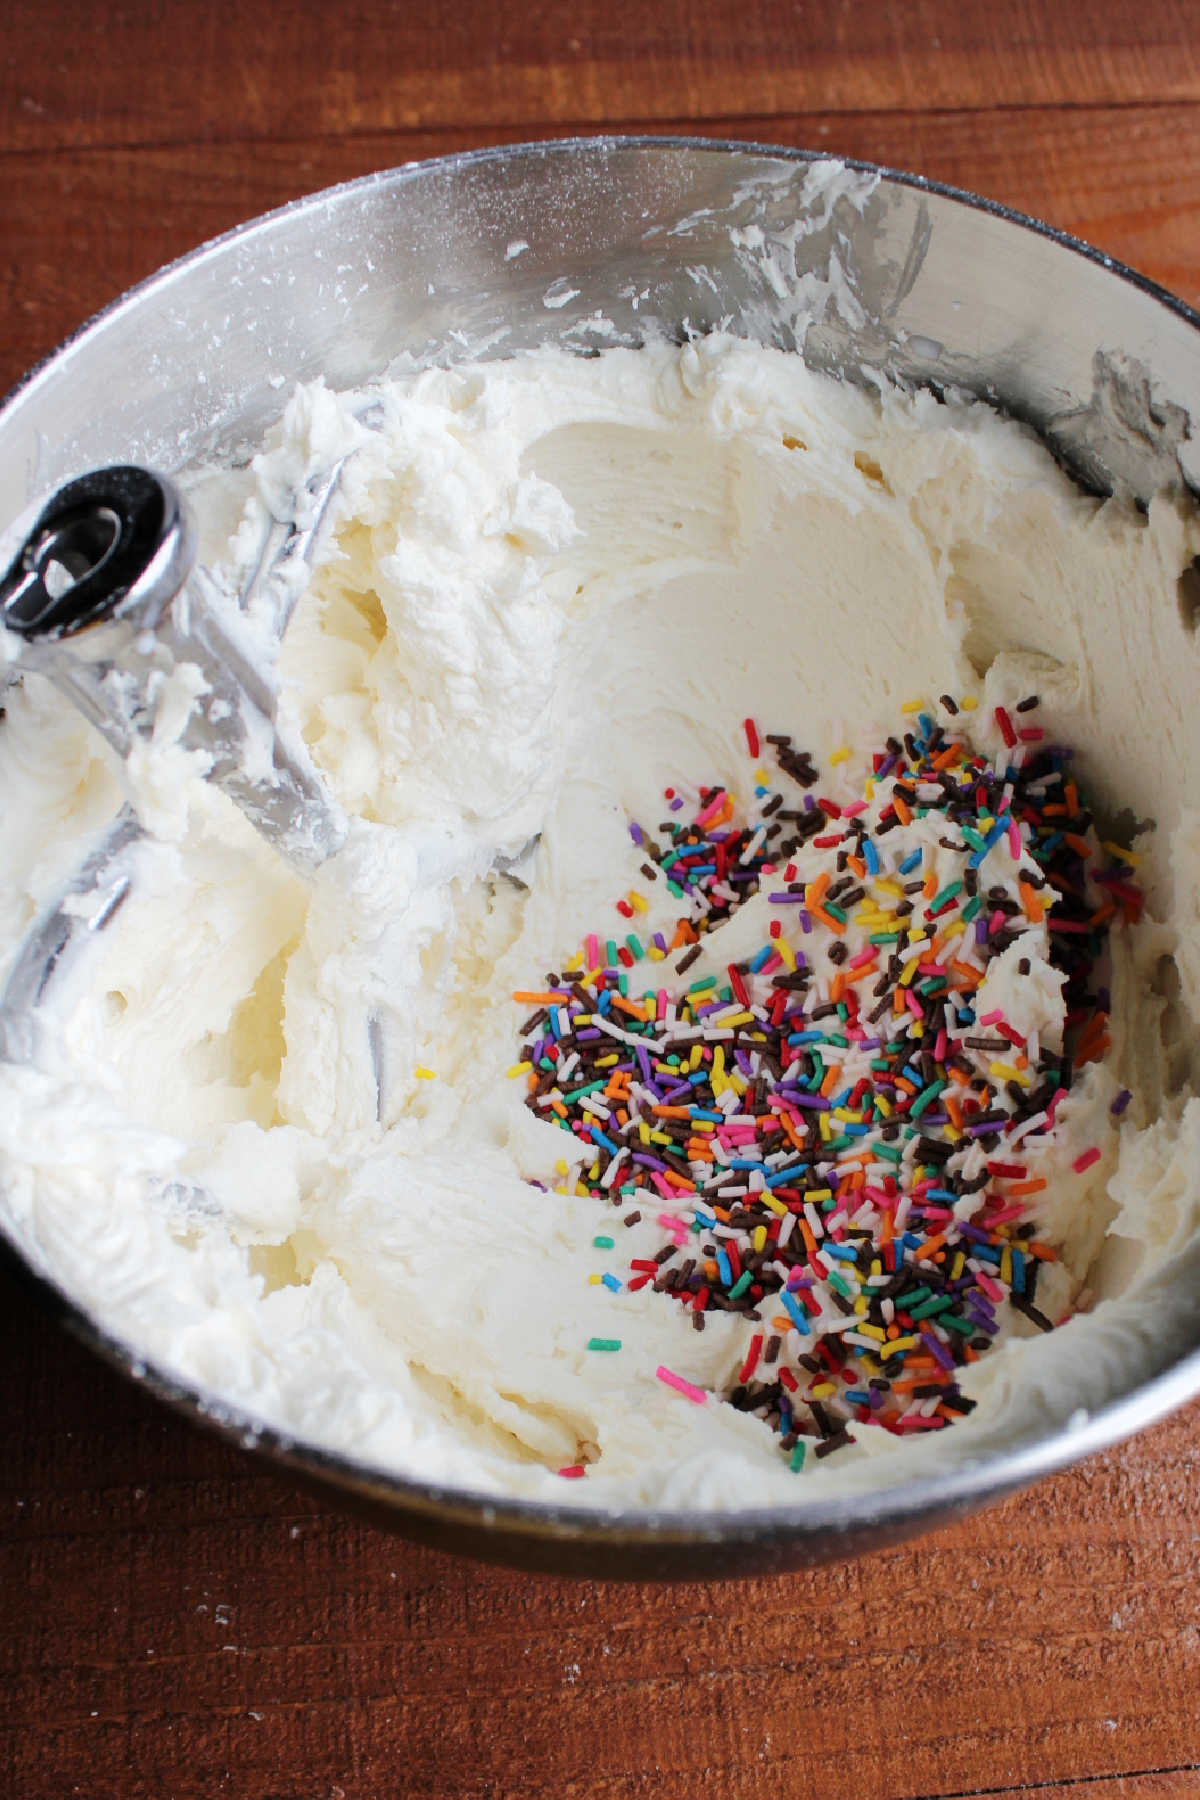 Bowl of buttercream with pile of sprinkles inside, ready to be mixed together.